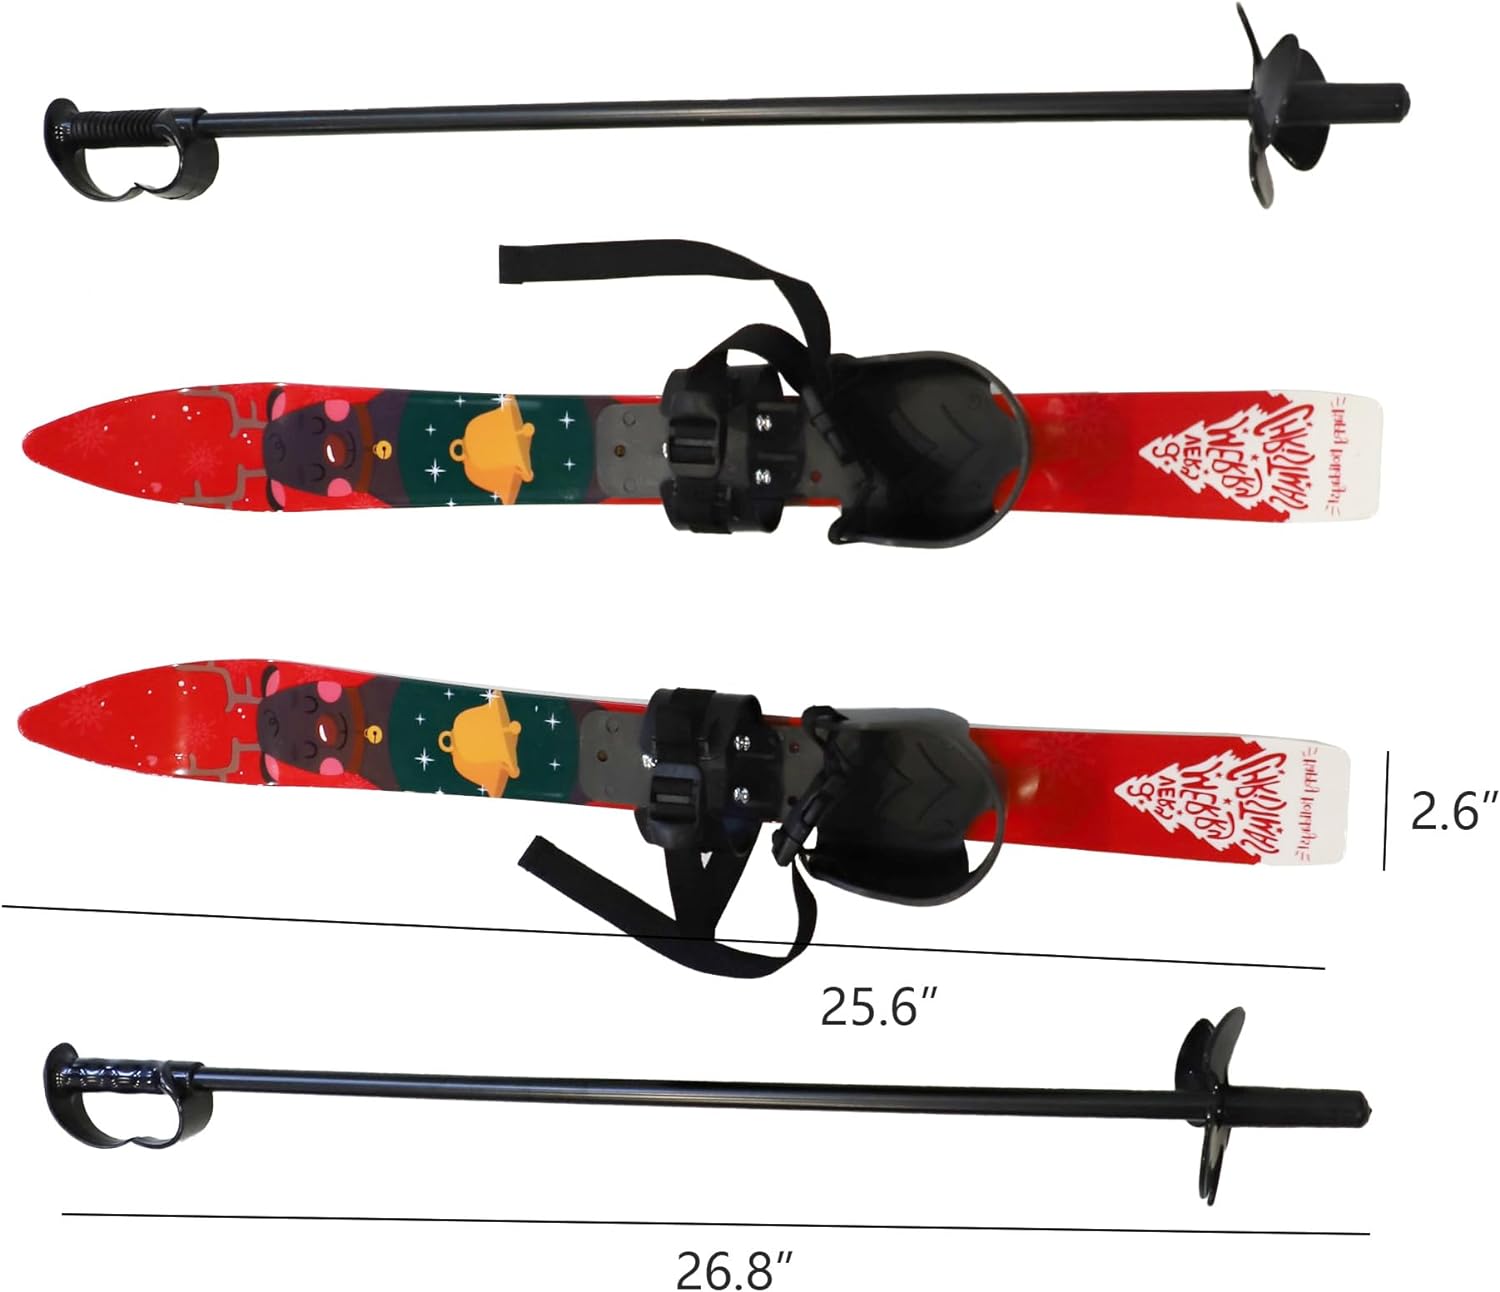 Snow Ski and Pole Set with Bindings 25.6" Ski Boards for Kids Age 2-4 Beginners, Red